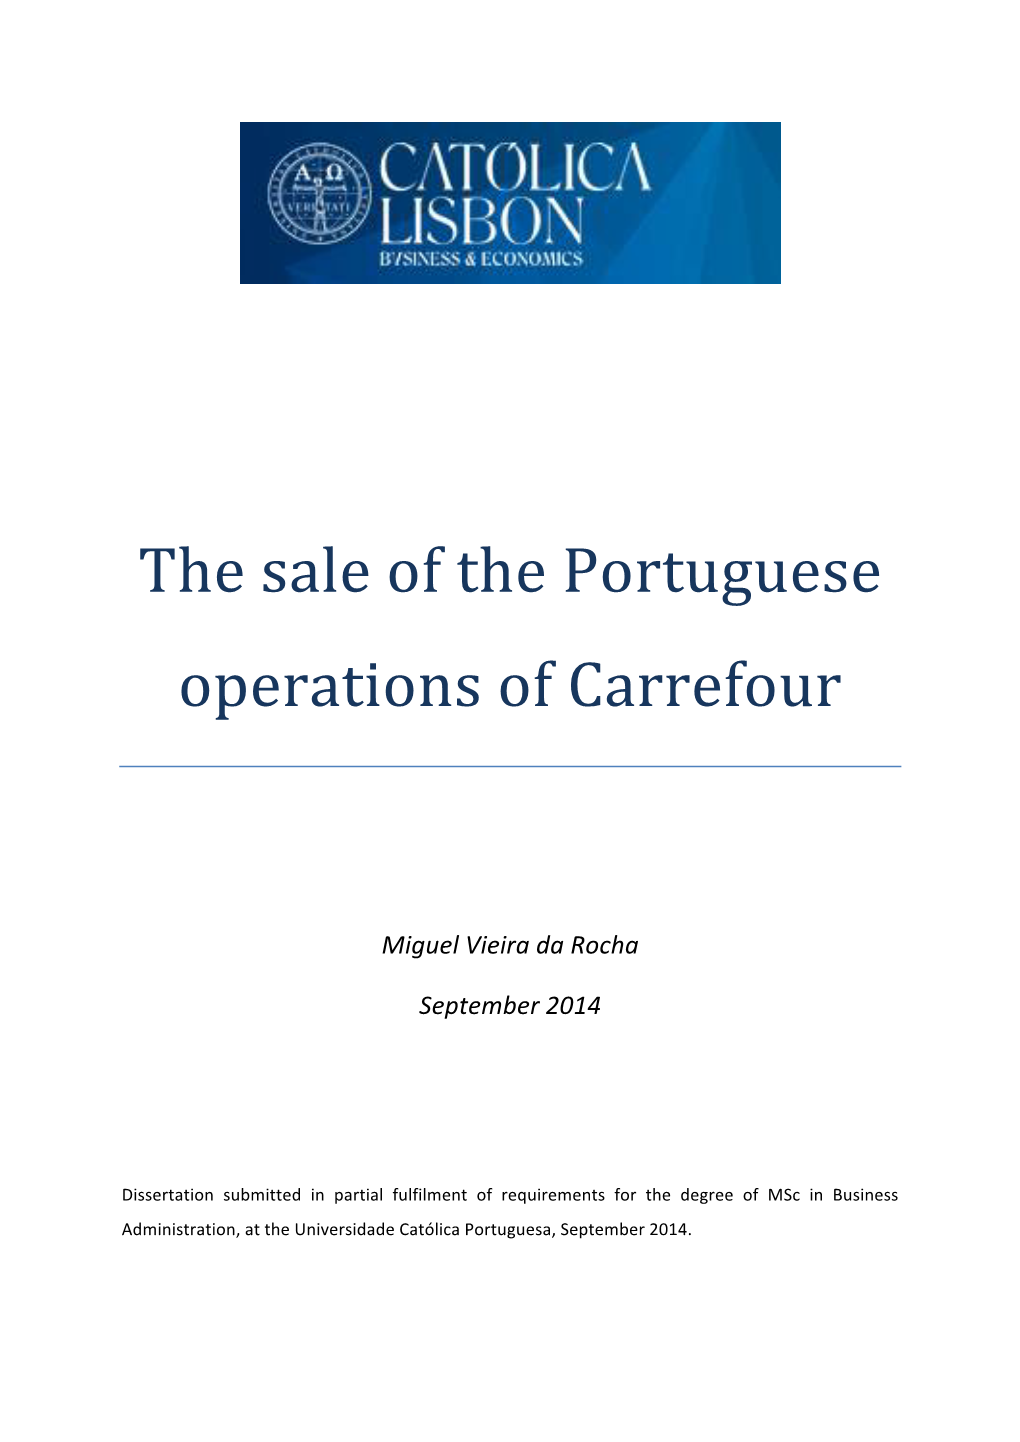 The Sale of the Portuguese Operations of Carrefour